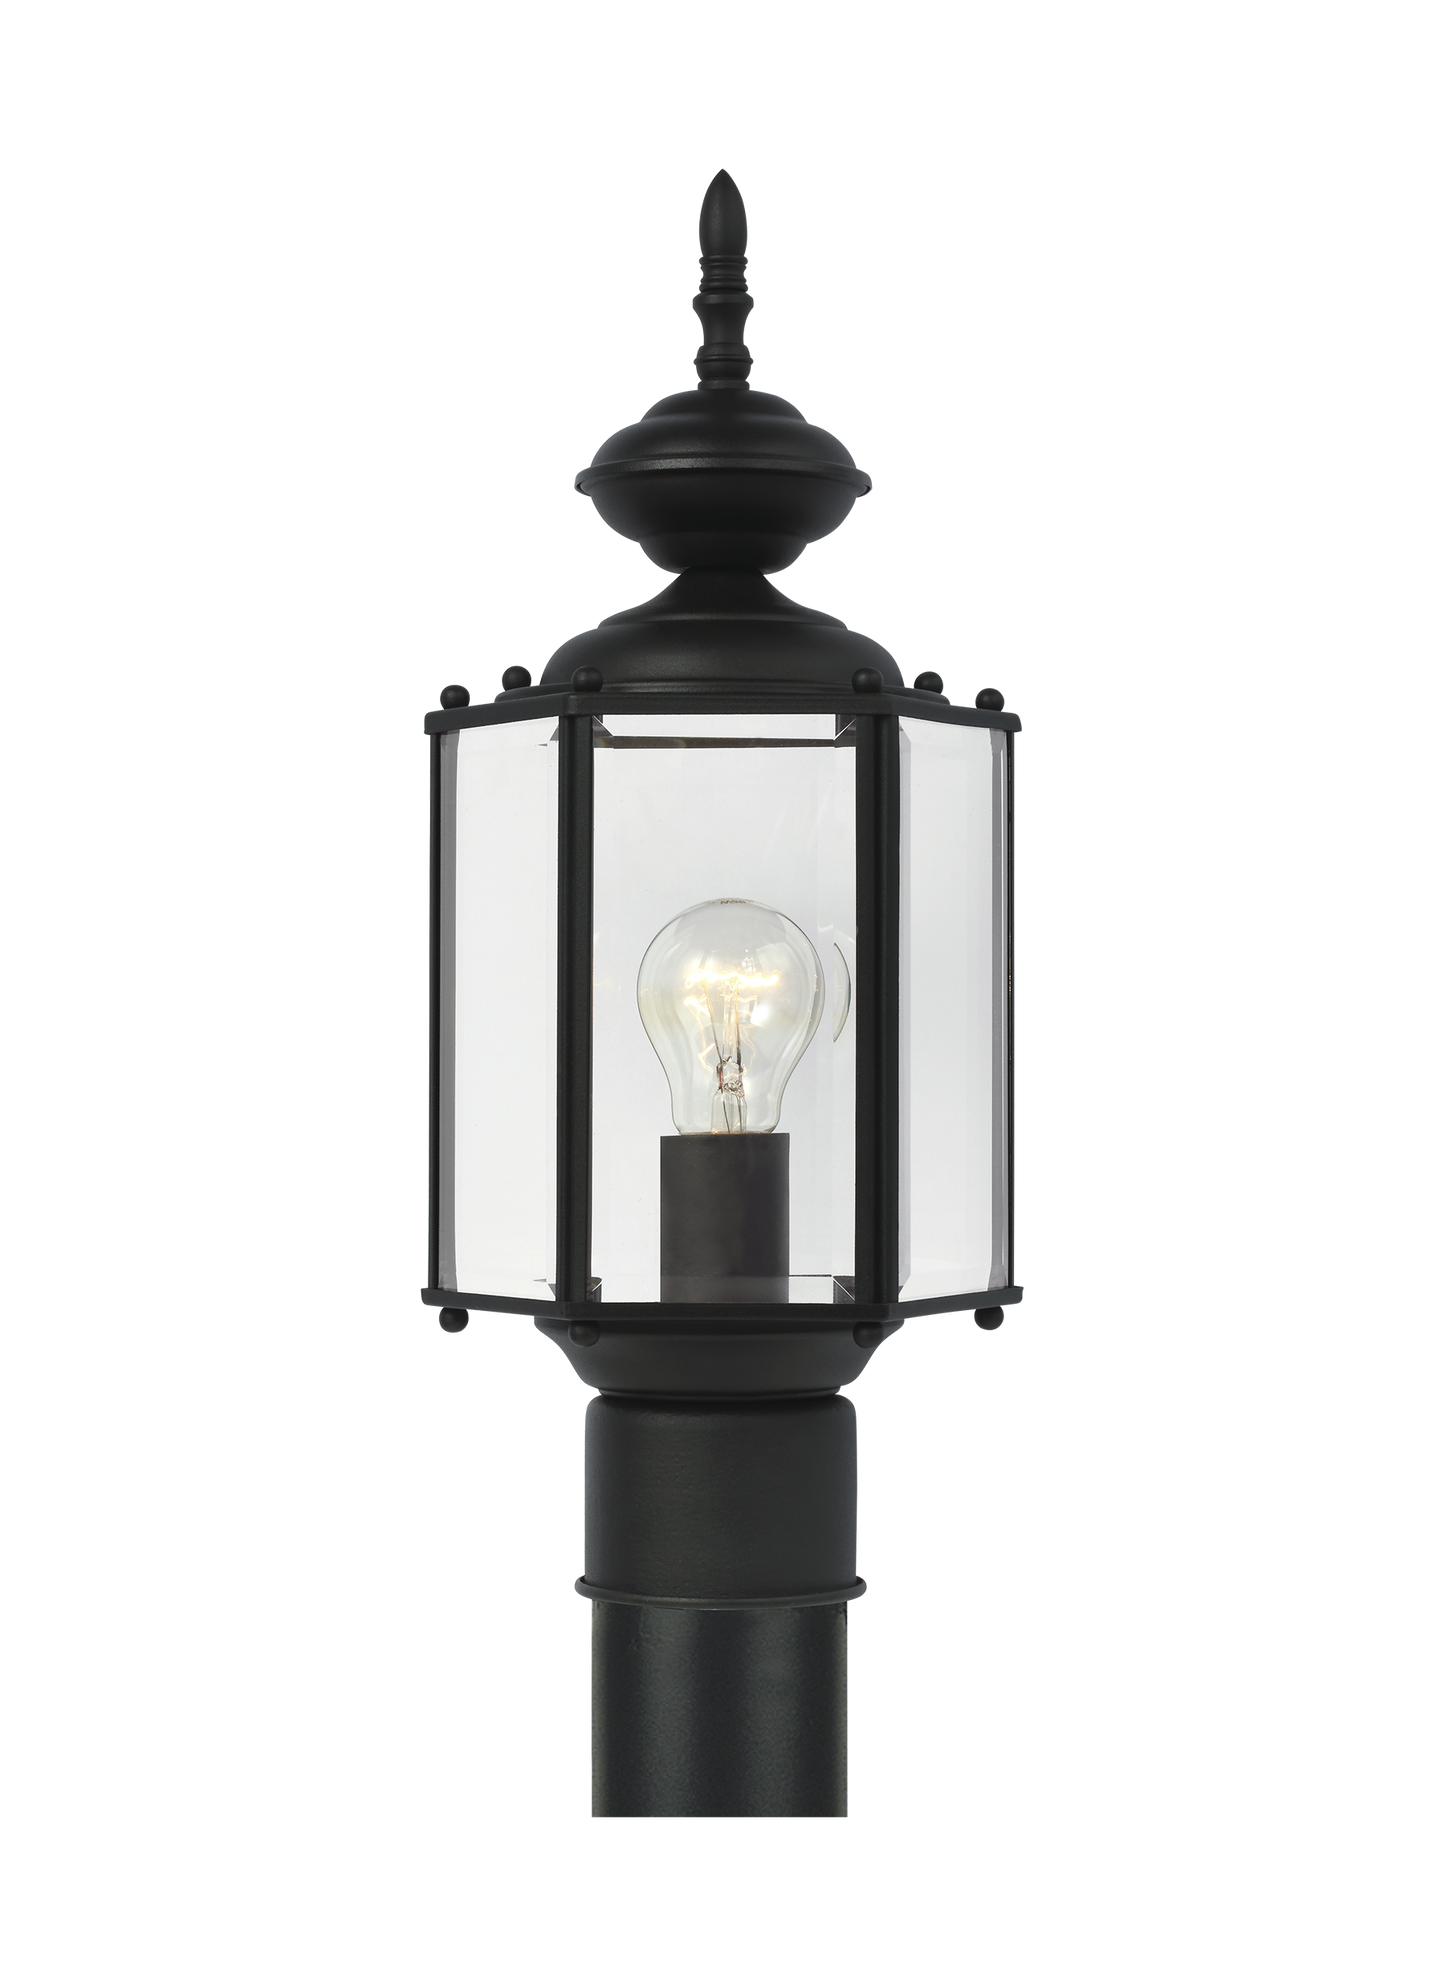 Classico traditional 1-light outdoor exterior post lantern in black finish with clear beveled glass panels